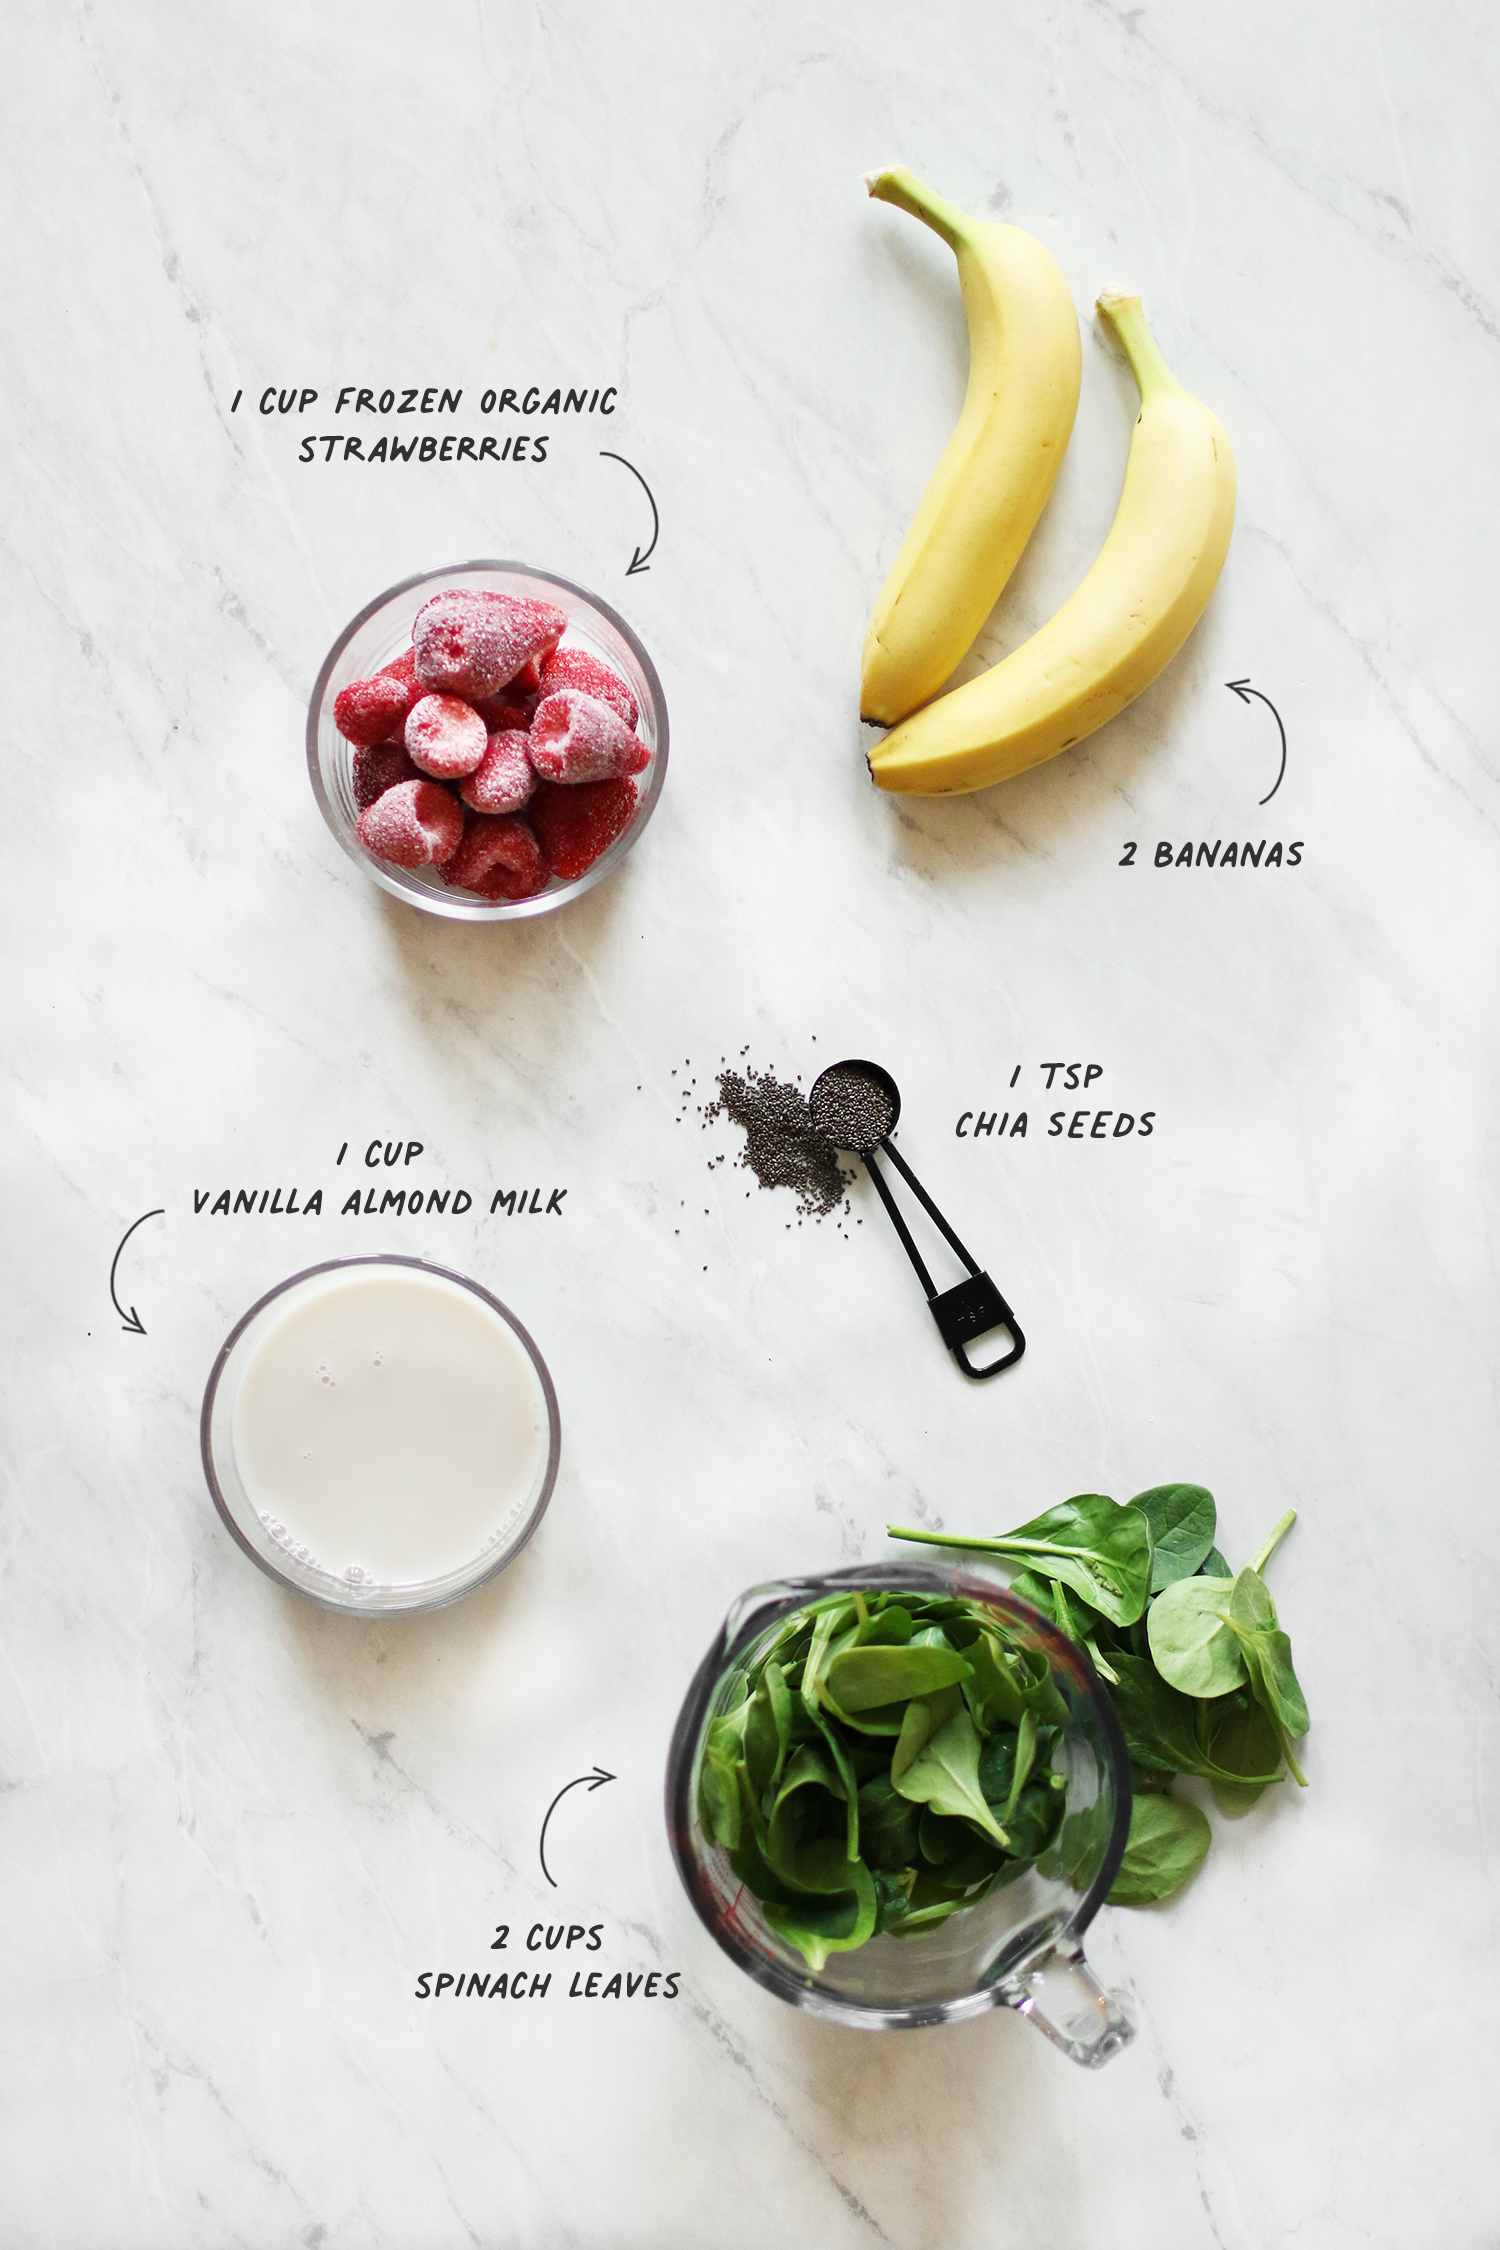 A favorite green smoothie recipe and my go-to option for my first meal option these days. Catch my Strawberry Banana Green Smoothie recipe over on KaraLayne.com!